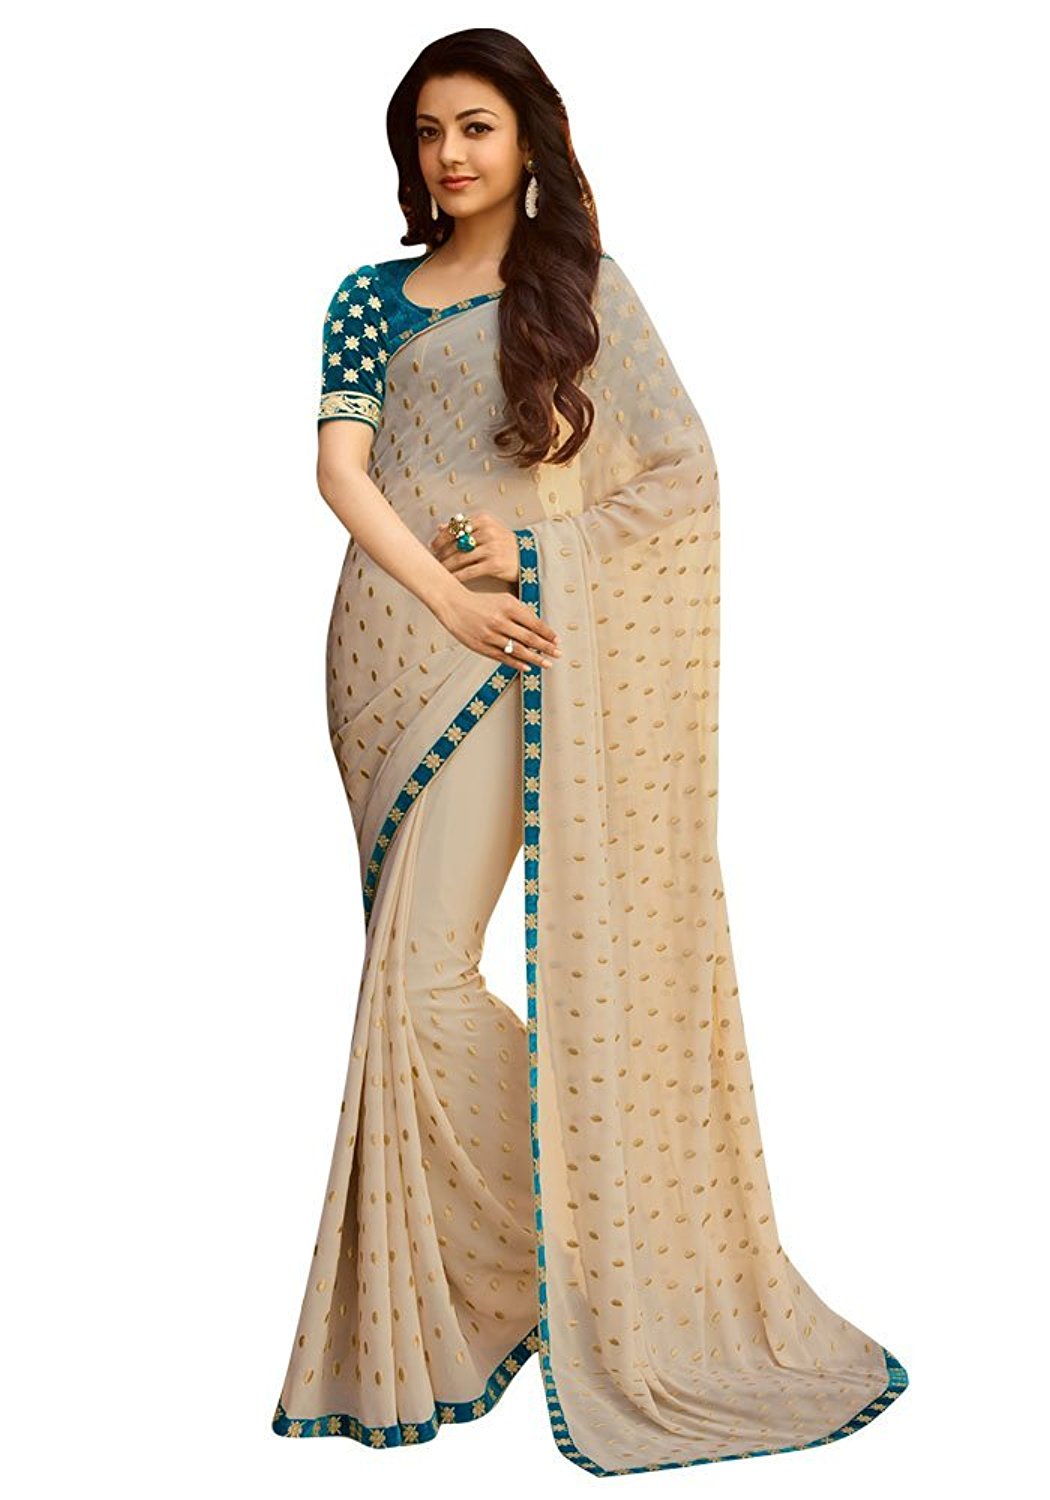 Buy Indian Style Sarees New Arrivals Latest Women's Bollywood Designer